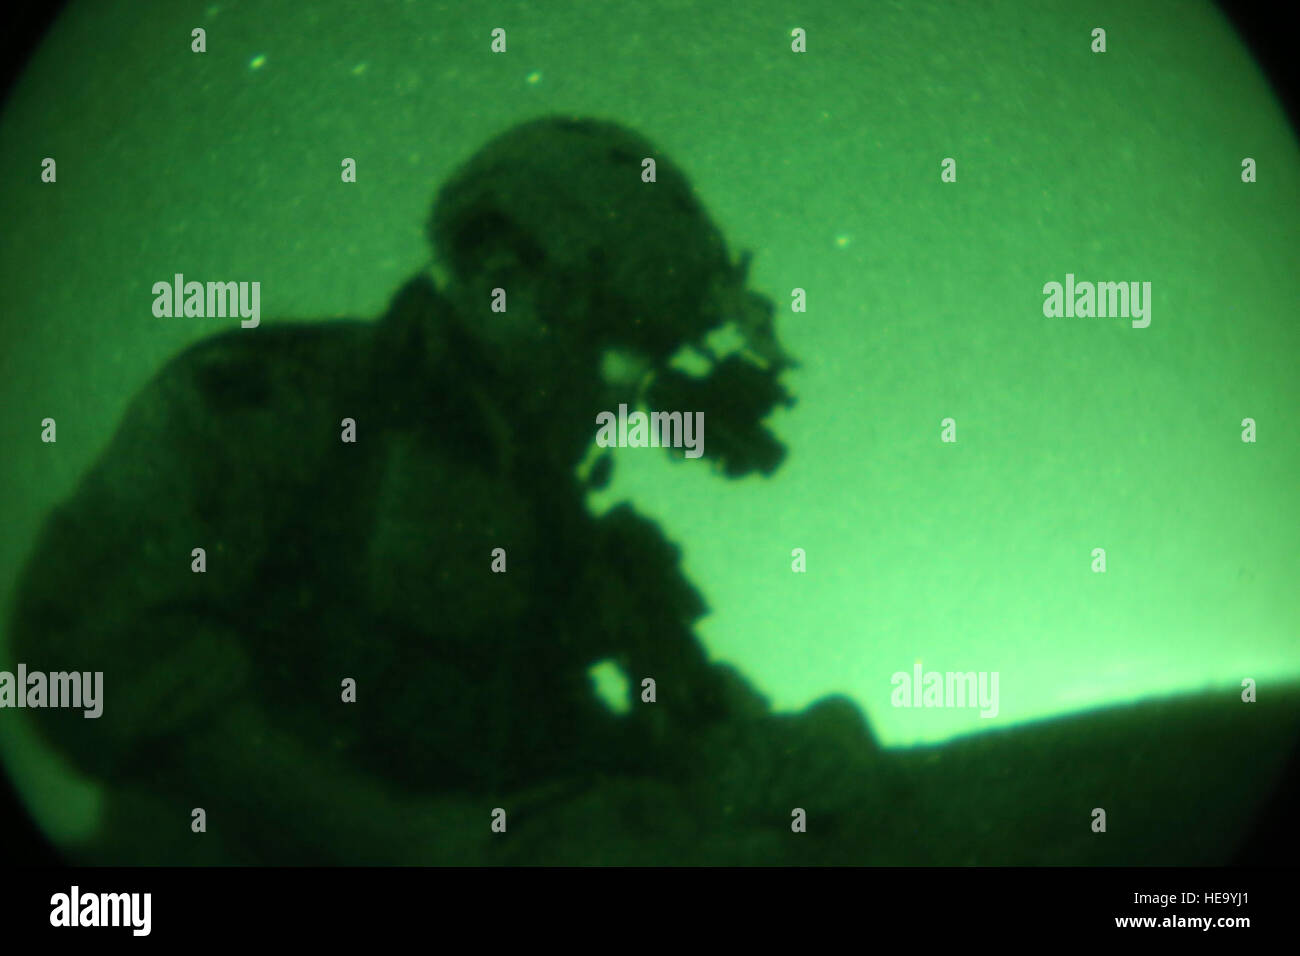 A Marine with Company B, 1st Reconnaissance Battalion, 1st Marine Division, adjusts his gear during a night reconnaissance mission aboard Camp Pendleton, Calif., Sept. 28, 2016. During a recon mission, Marines spend their time monitoring enemy actions and reporting them to higher headquarters. Commanders use the information to plan raids that can capture high value targets.  Lance Cpl. Joseph Prado) Stock Photo